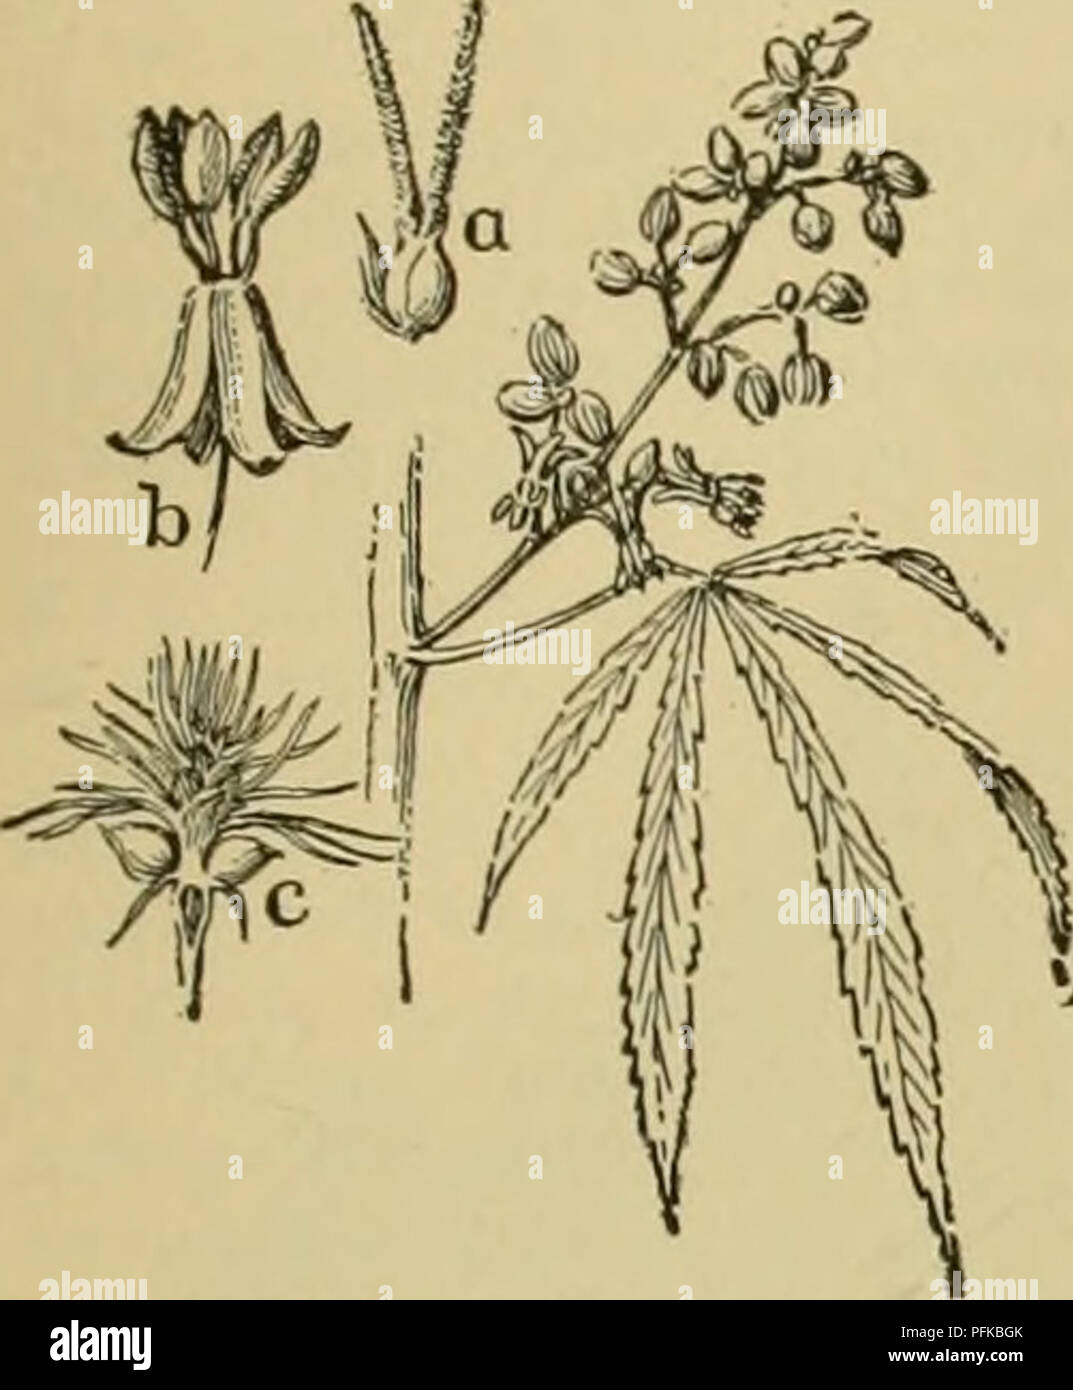 . Cyclopedia of farm crops. Farm produce; Agriculture. HEMP HEMP 377 American Grasses : Vol. I, Grasses of the Southwest, 1891; Vol. II, Grasses of the Pacific Slope, 1893, Division of Botany, Bulletin Nos. 12 and 13. HEMP. Cannabis saliva, Linn. Urticacece. Figs. 566-571. [See also Fiber plants.] By J. N. Harper. An annual dioecious plant, reaching a height of ten feet and more, grown for its long bast fiber, and for its seeds. Staminate flowers drooping in axil- lary panicles, hav- ing five sepals and five stamens; pistillate flowers in short spikes, with one sepal folding about the ovary. L Stock Photo